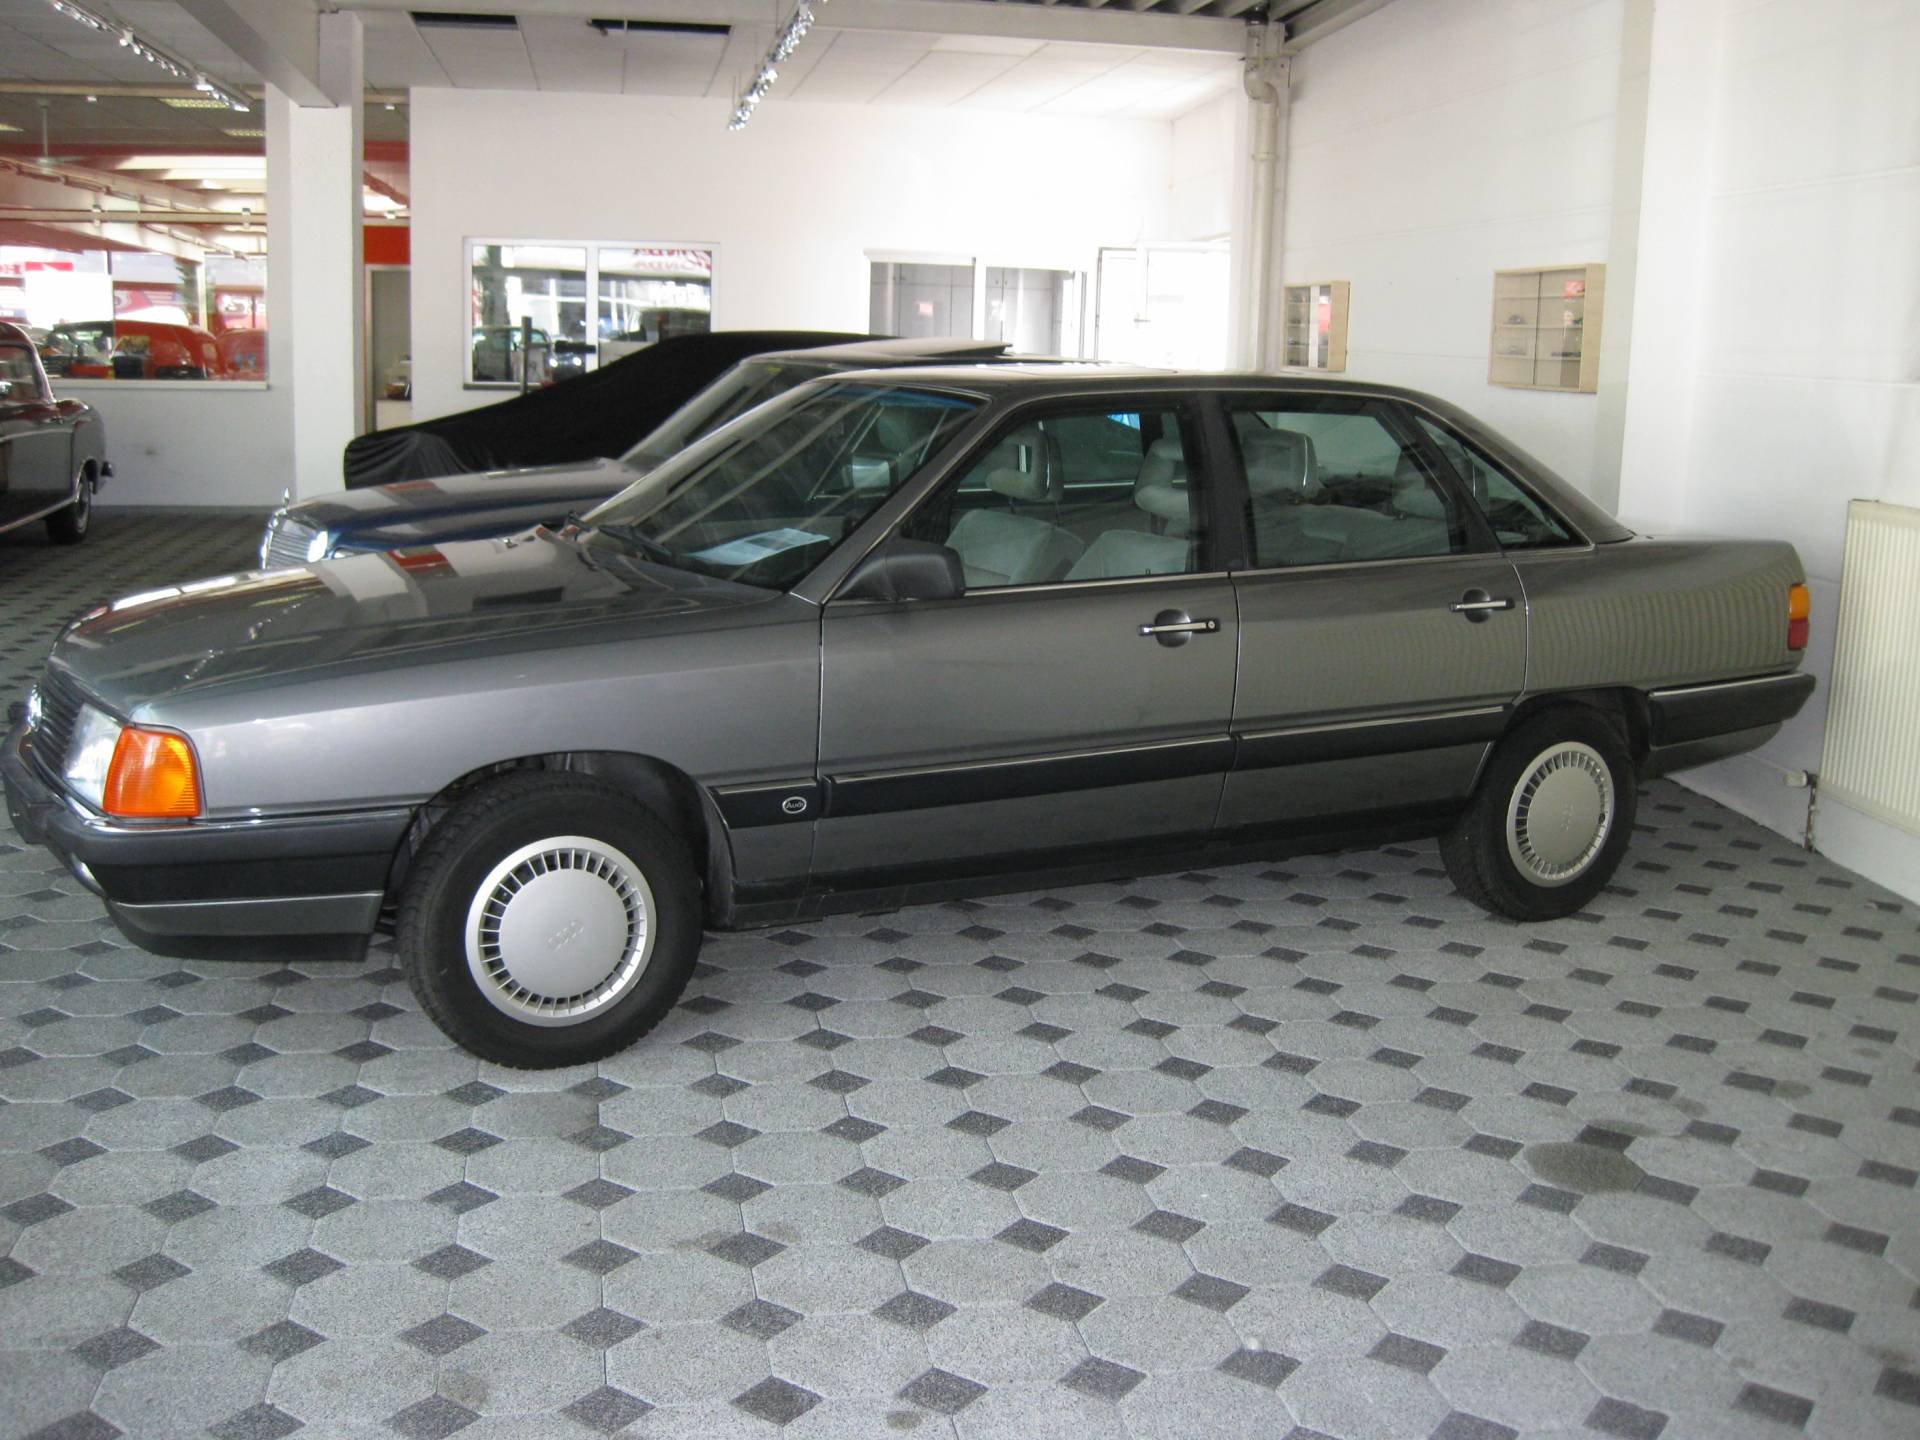 For Sale: Audi 100 - 2.0 (1986) offered for AUD 15,150